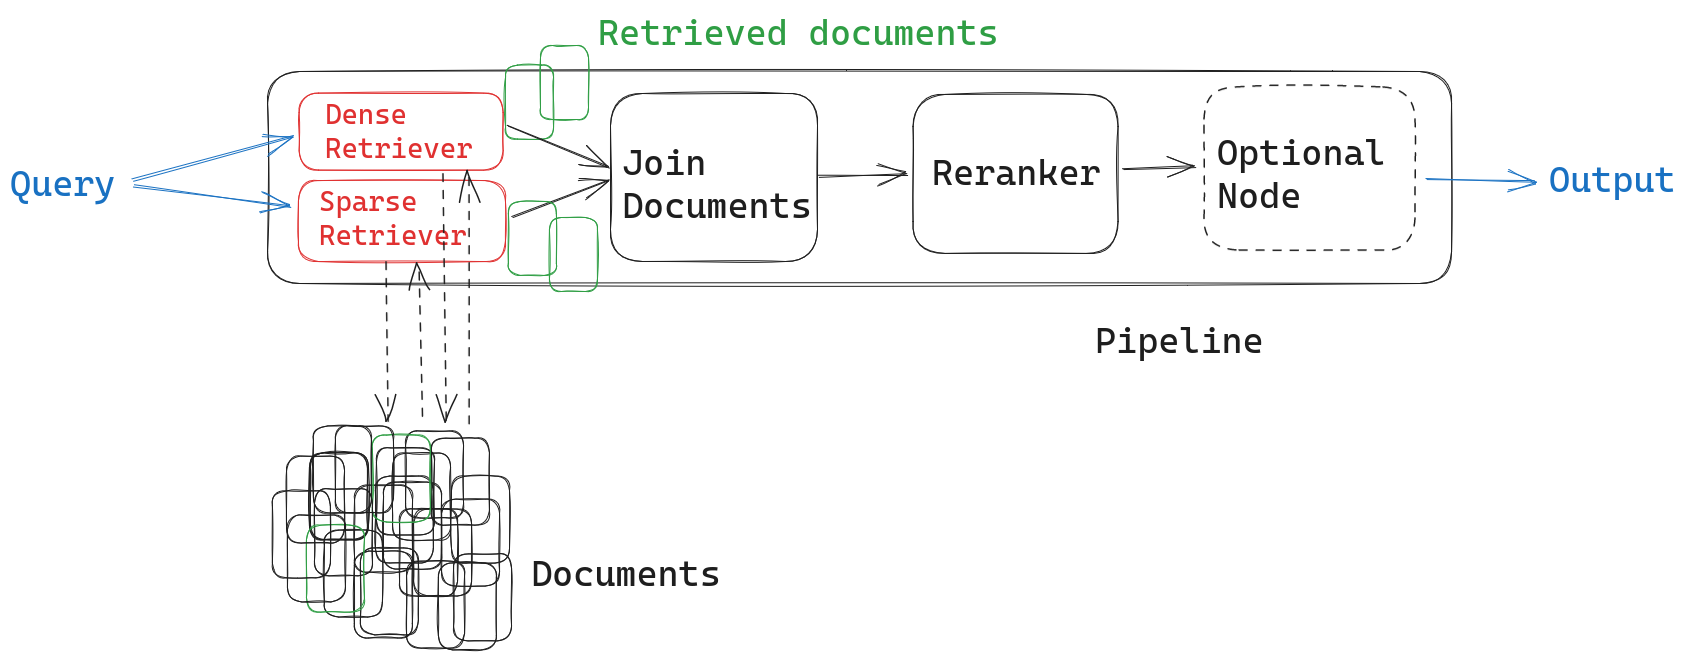 Sketch of a retrieval augmented pipeline with two retrievers, a node to join their results, and a ranker node.